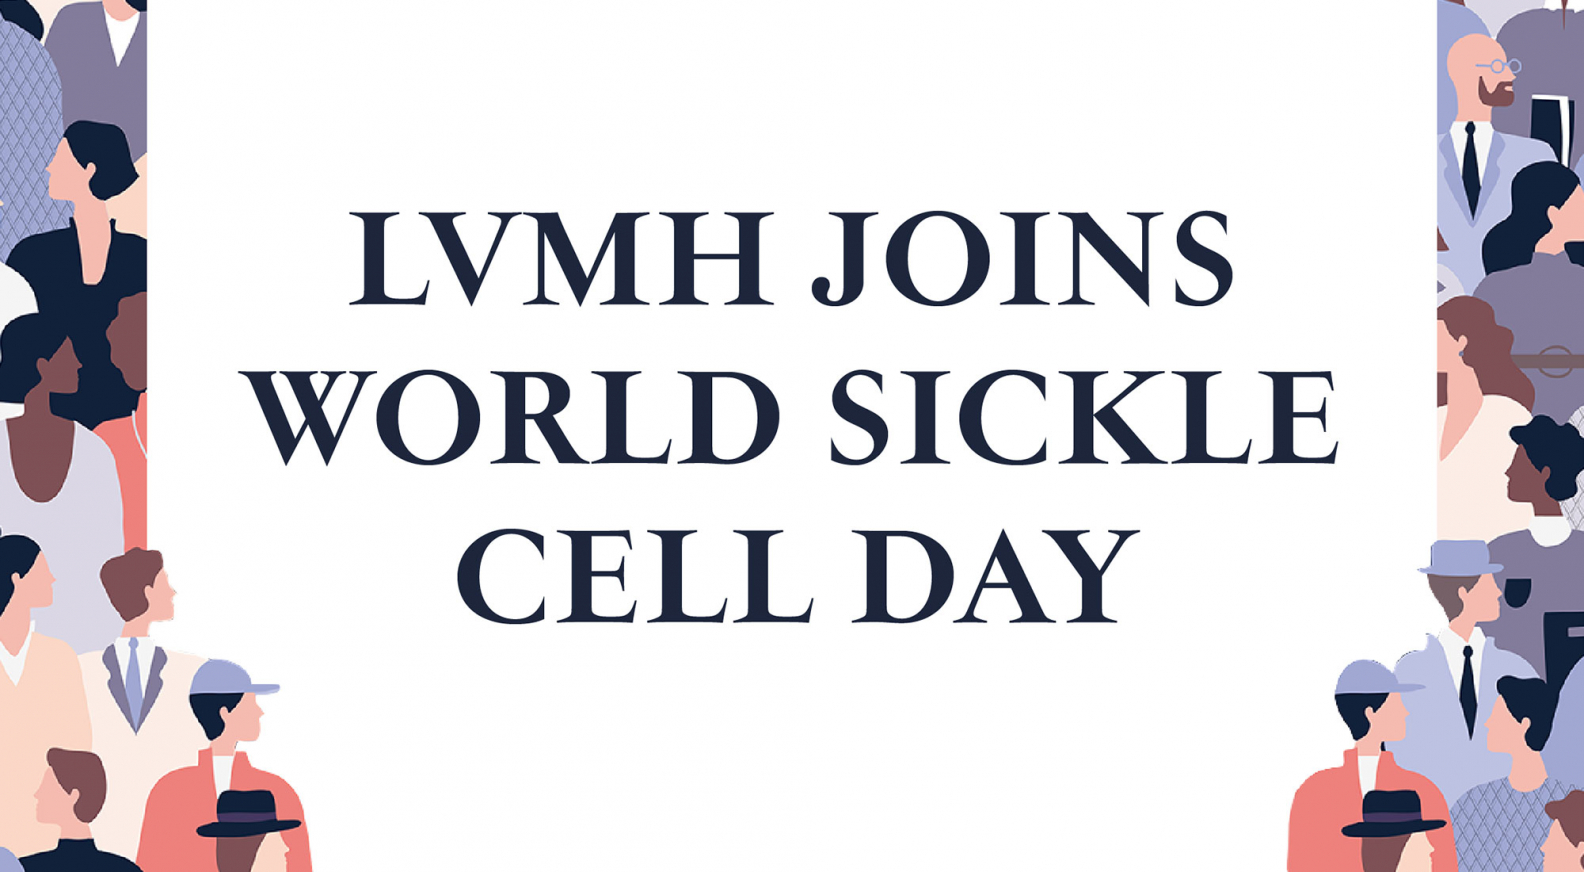 World Sickle Cell Day 2020: LVMH spotlights 10 years of support for teams  at Robert-Debré Hospital in Paris, one of the world's leading centers for  research and treatment of the disease - LVMH